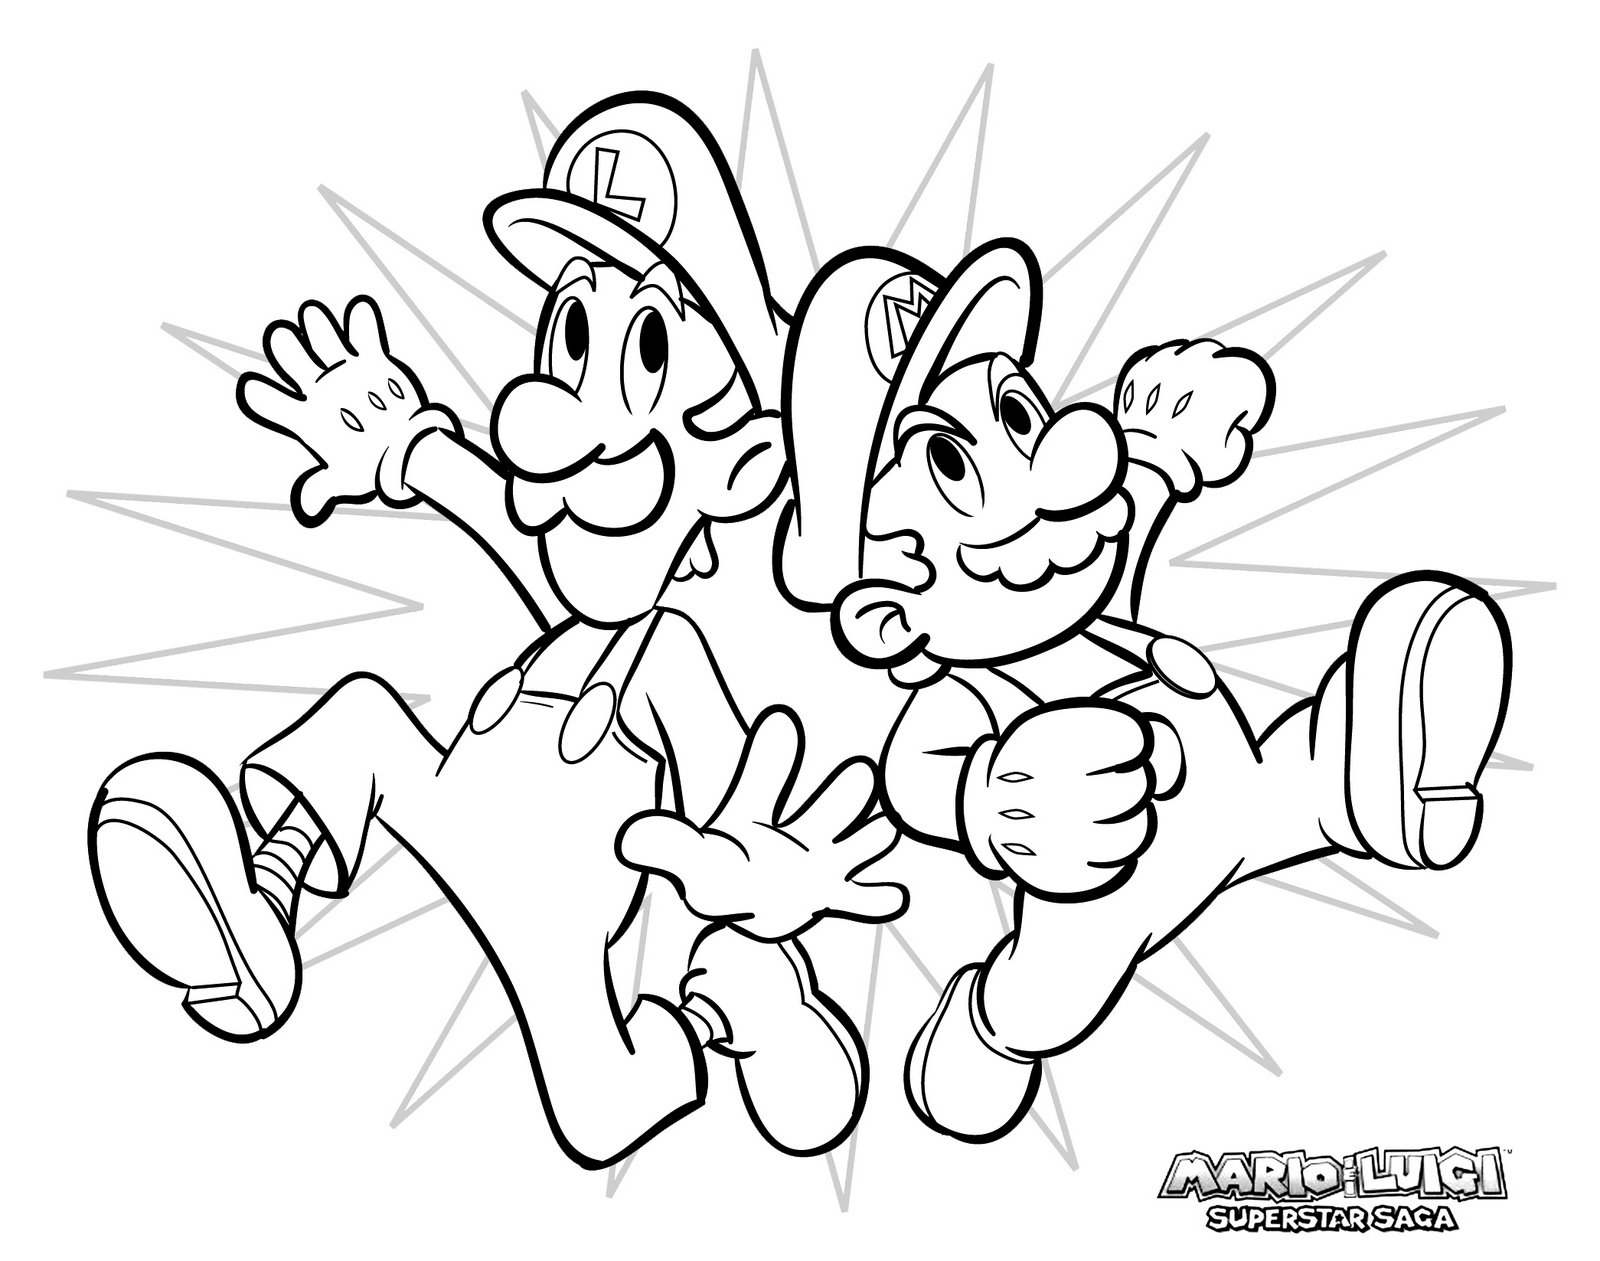 Mario Coloring Sheets on Super Mario Coloring Pages   Coloring Sheets For Kids